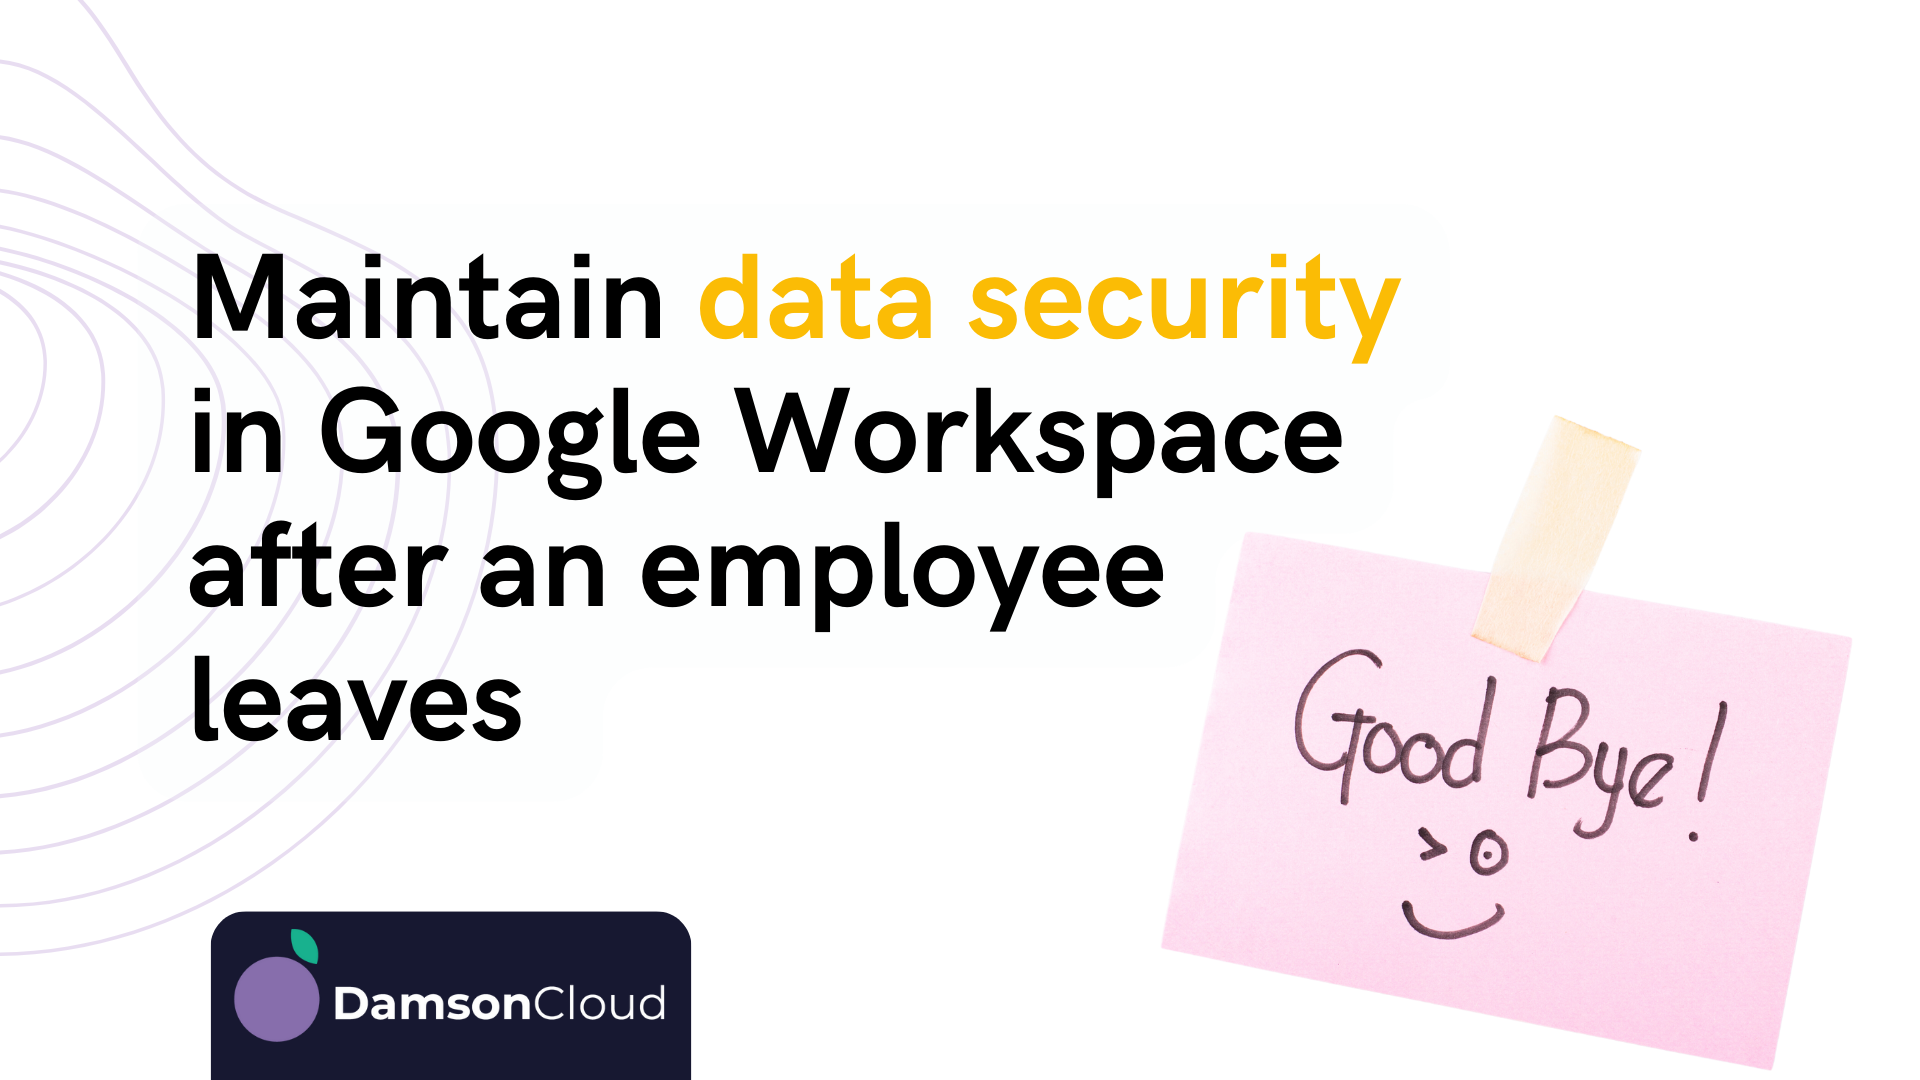 How to Offboard Employees in Google Workspace – Maintain Data Security